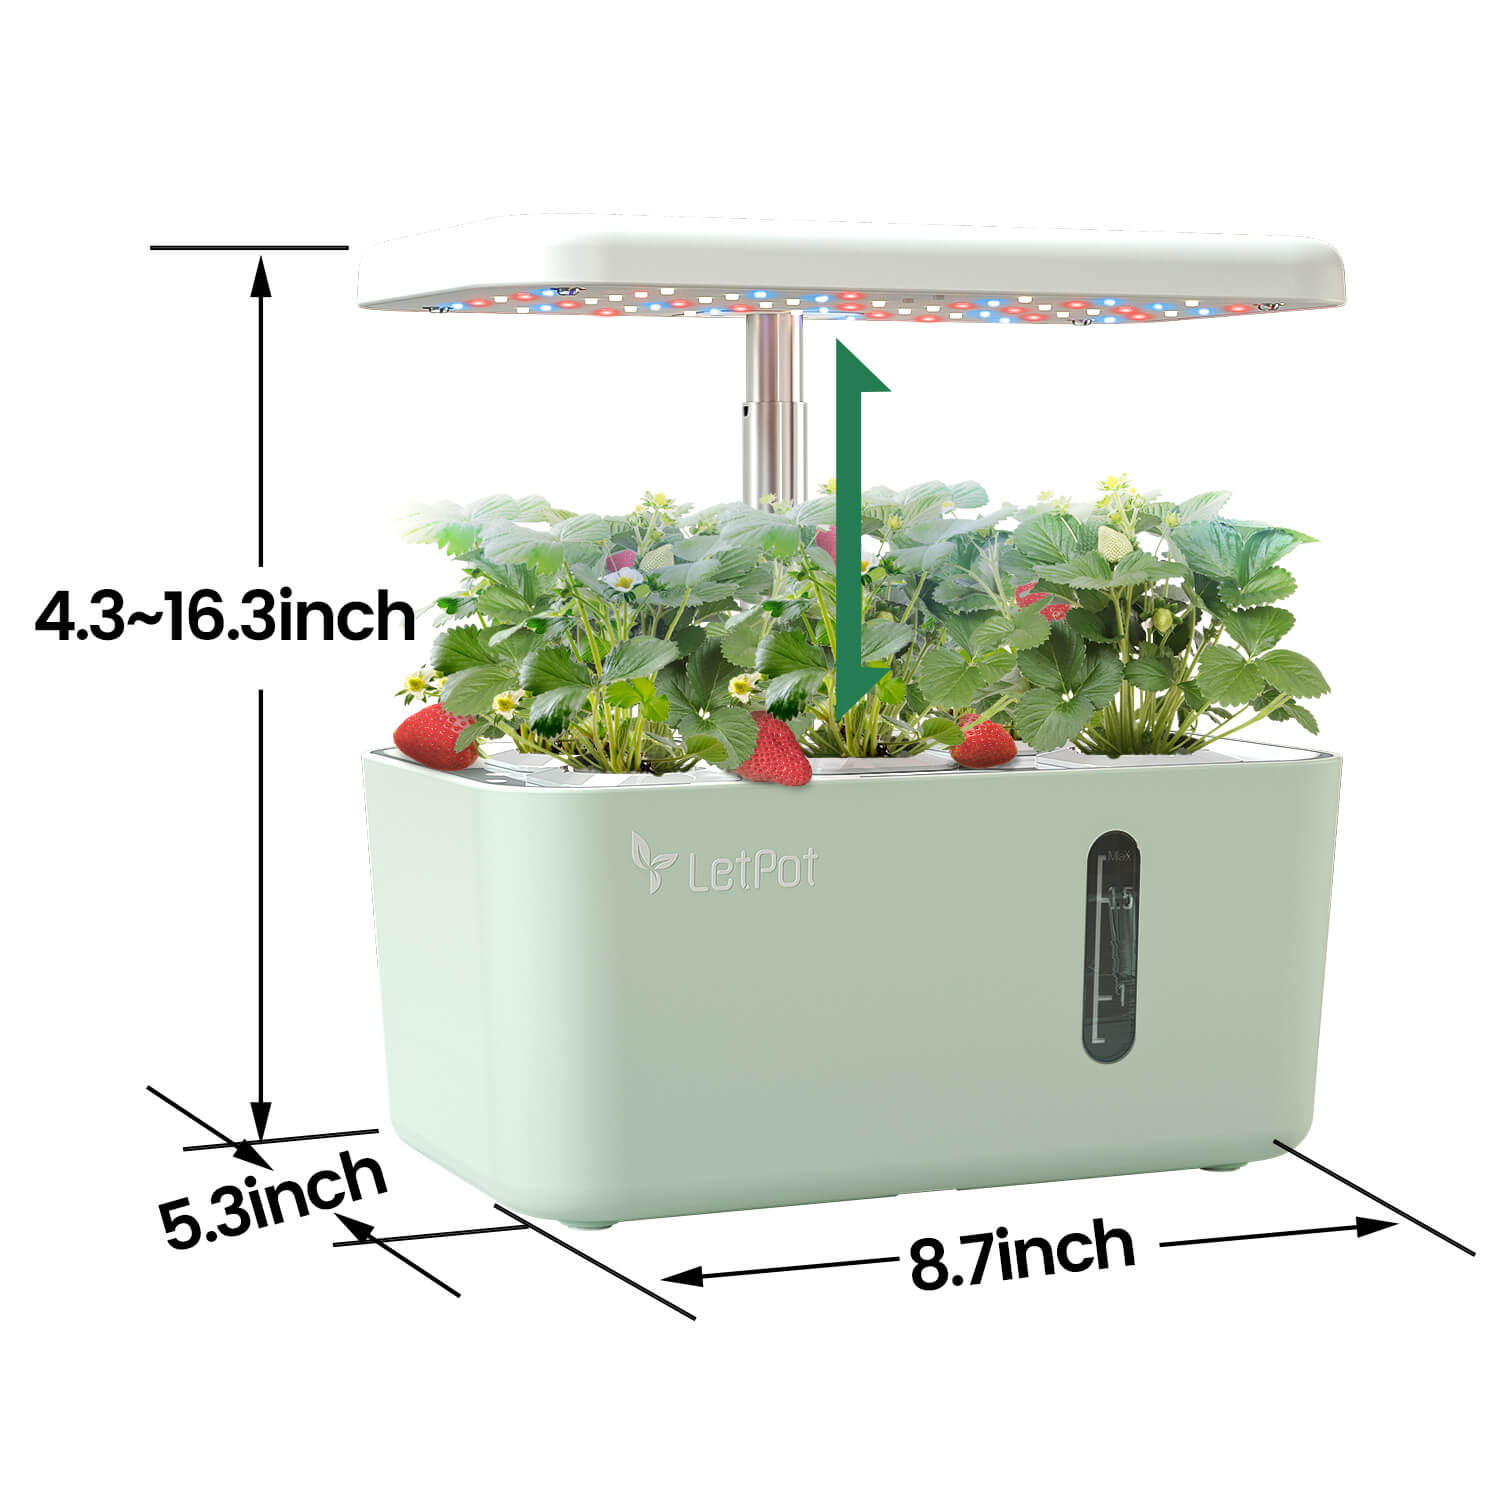 LetPot Mini Hydroponic Growing System - Product Size for Indoor Gardening